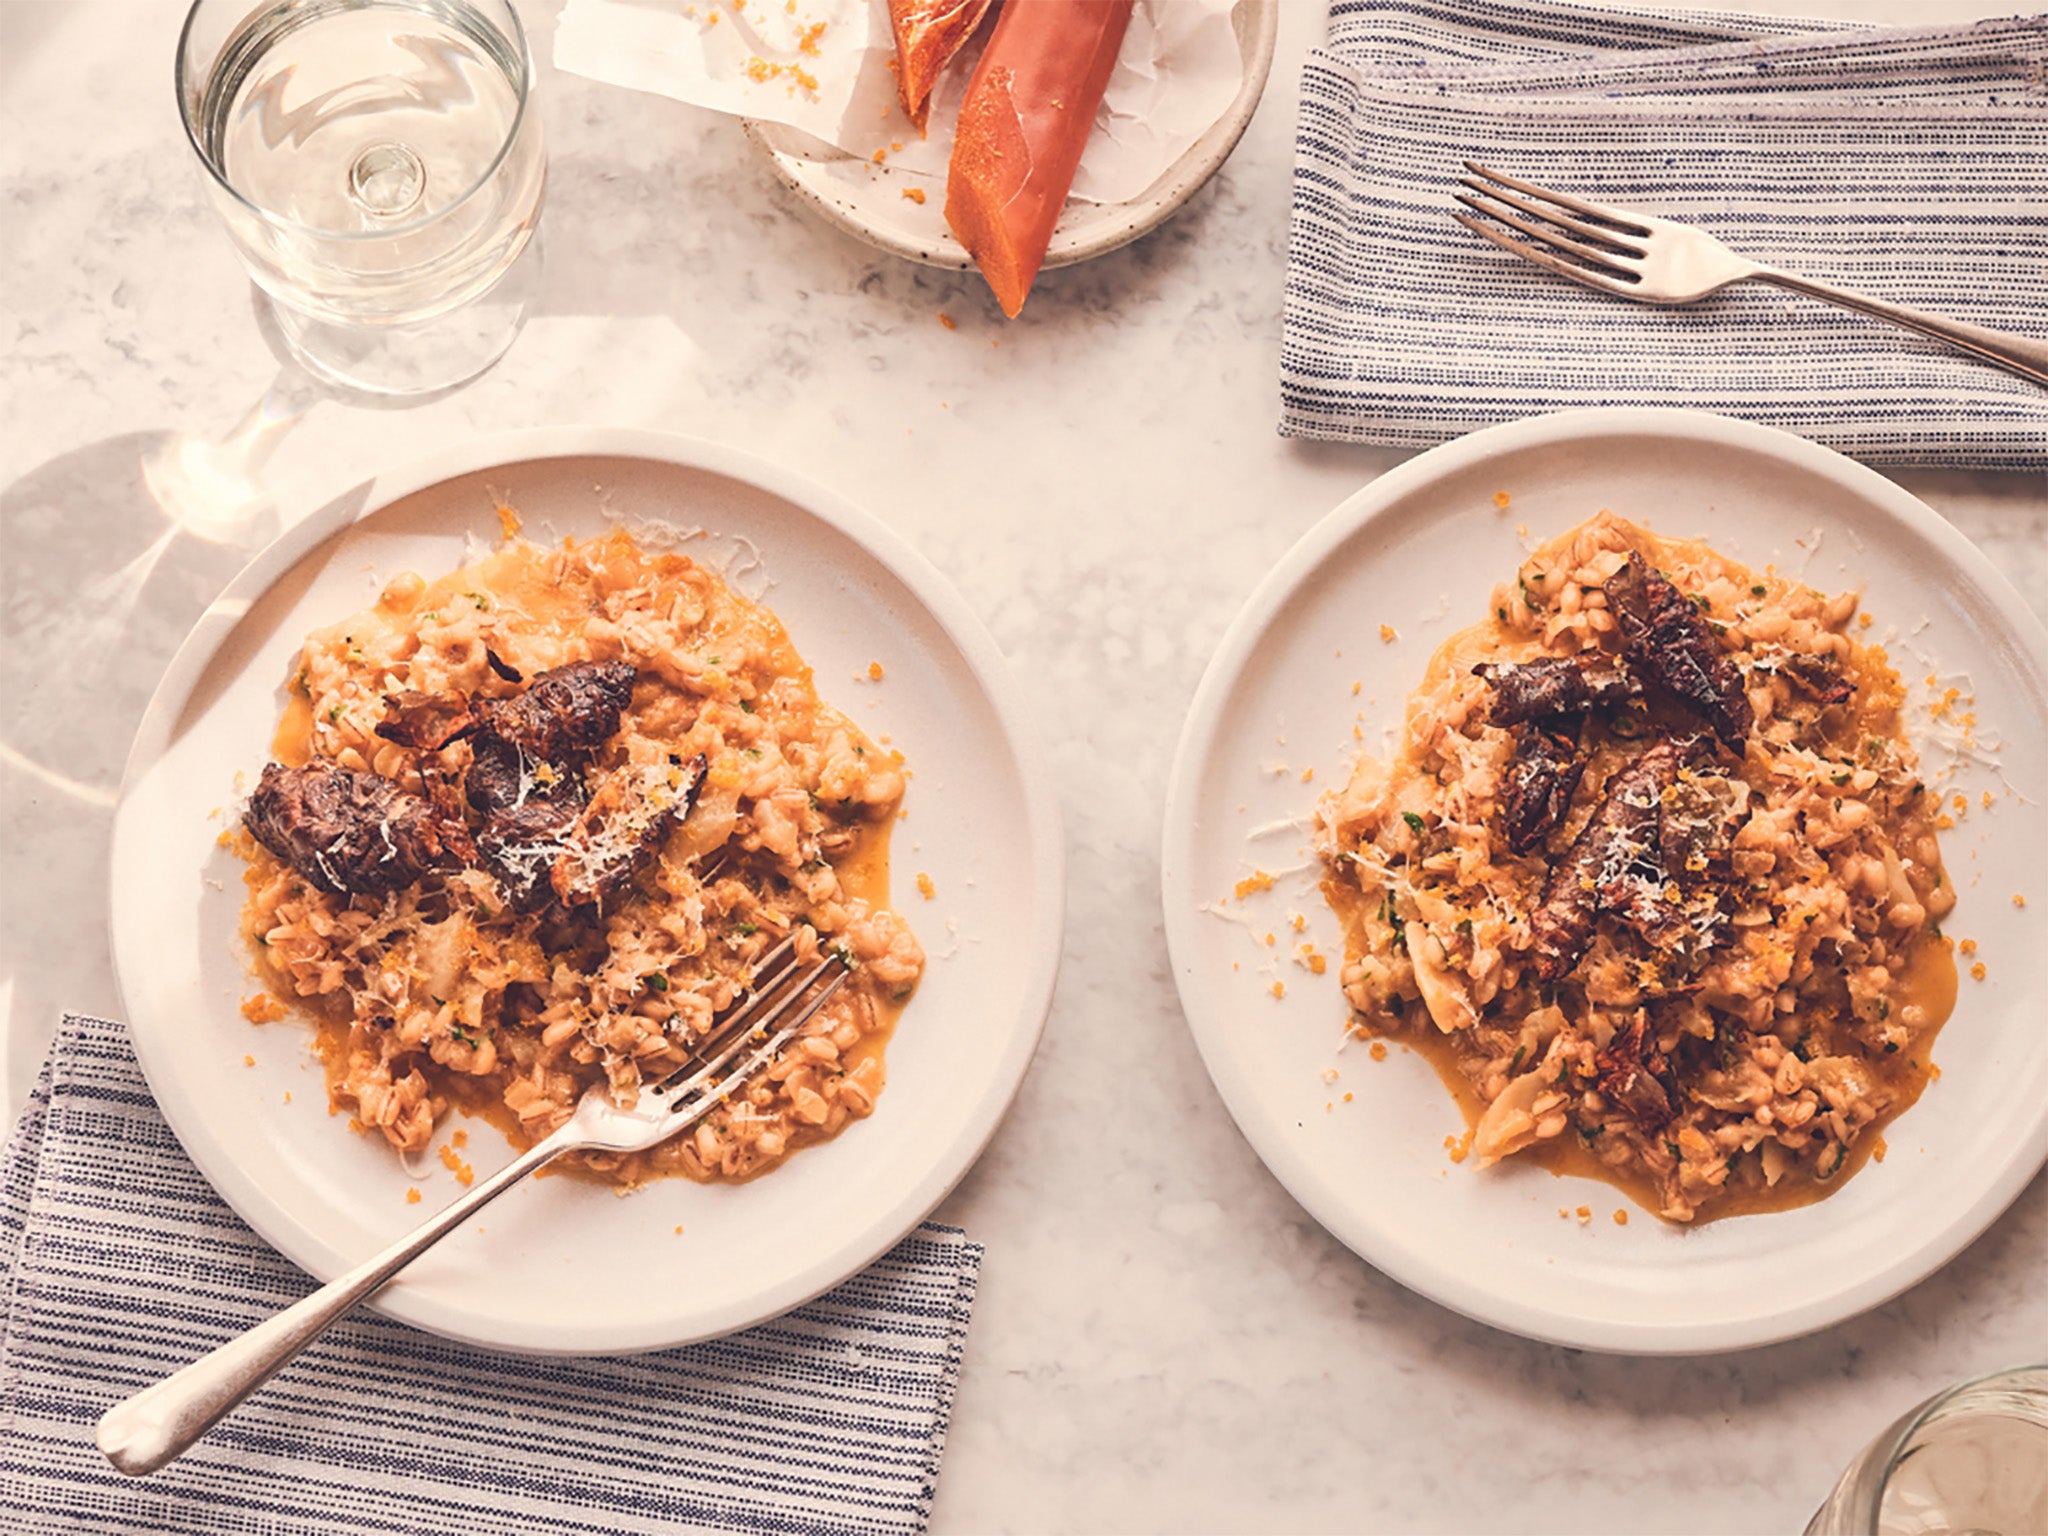 Bottarga is worth seeking out to make this ‘risotto’ extra special